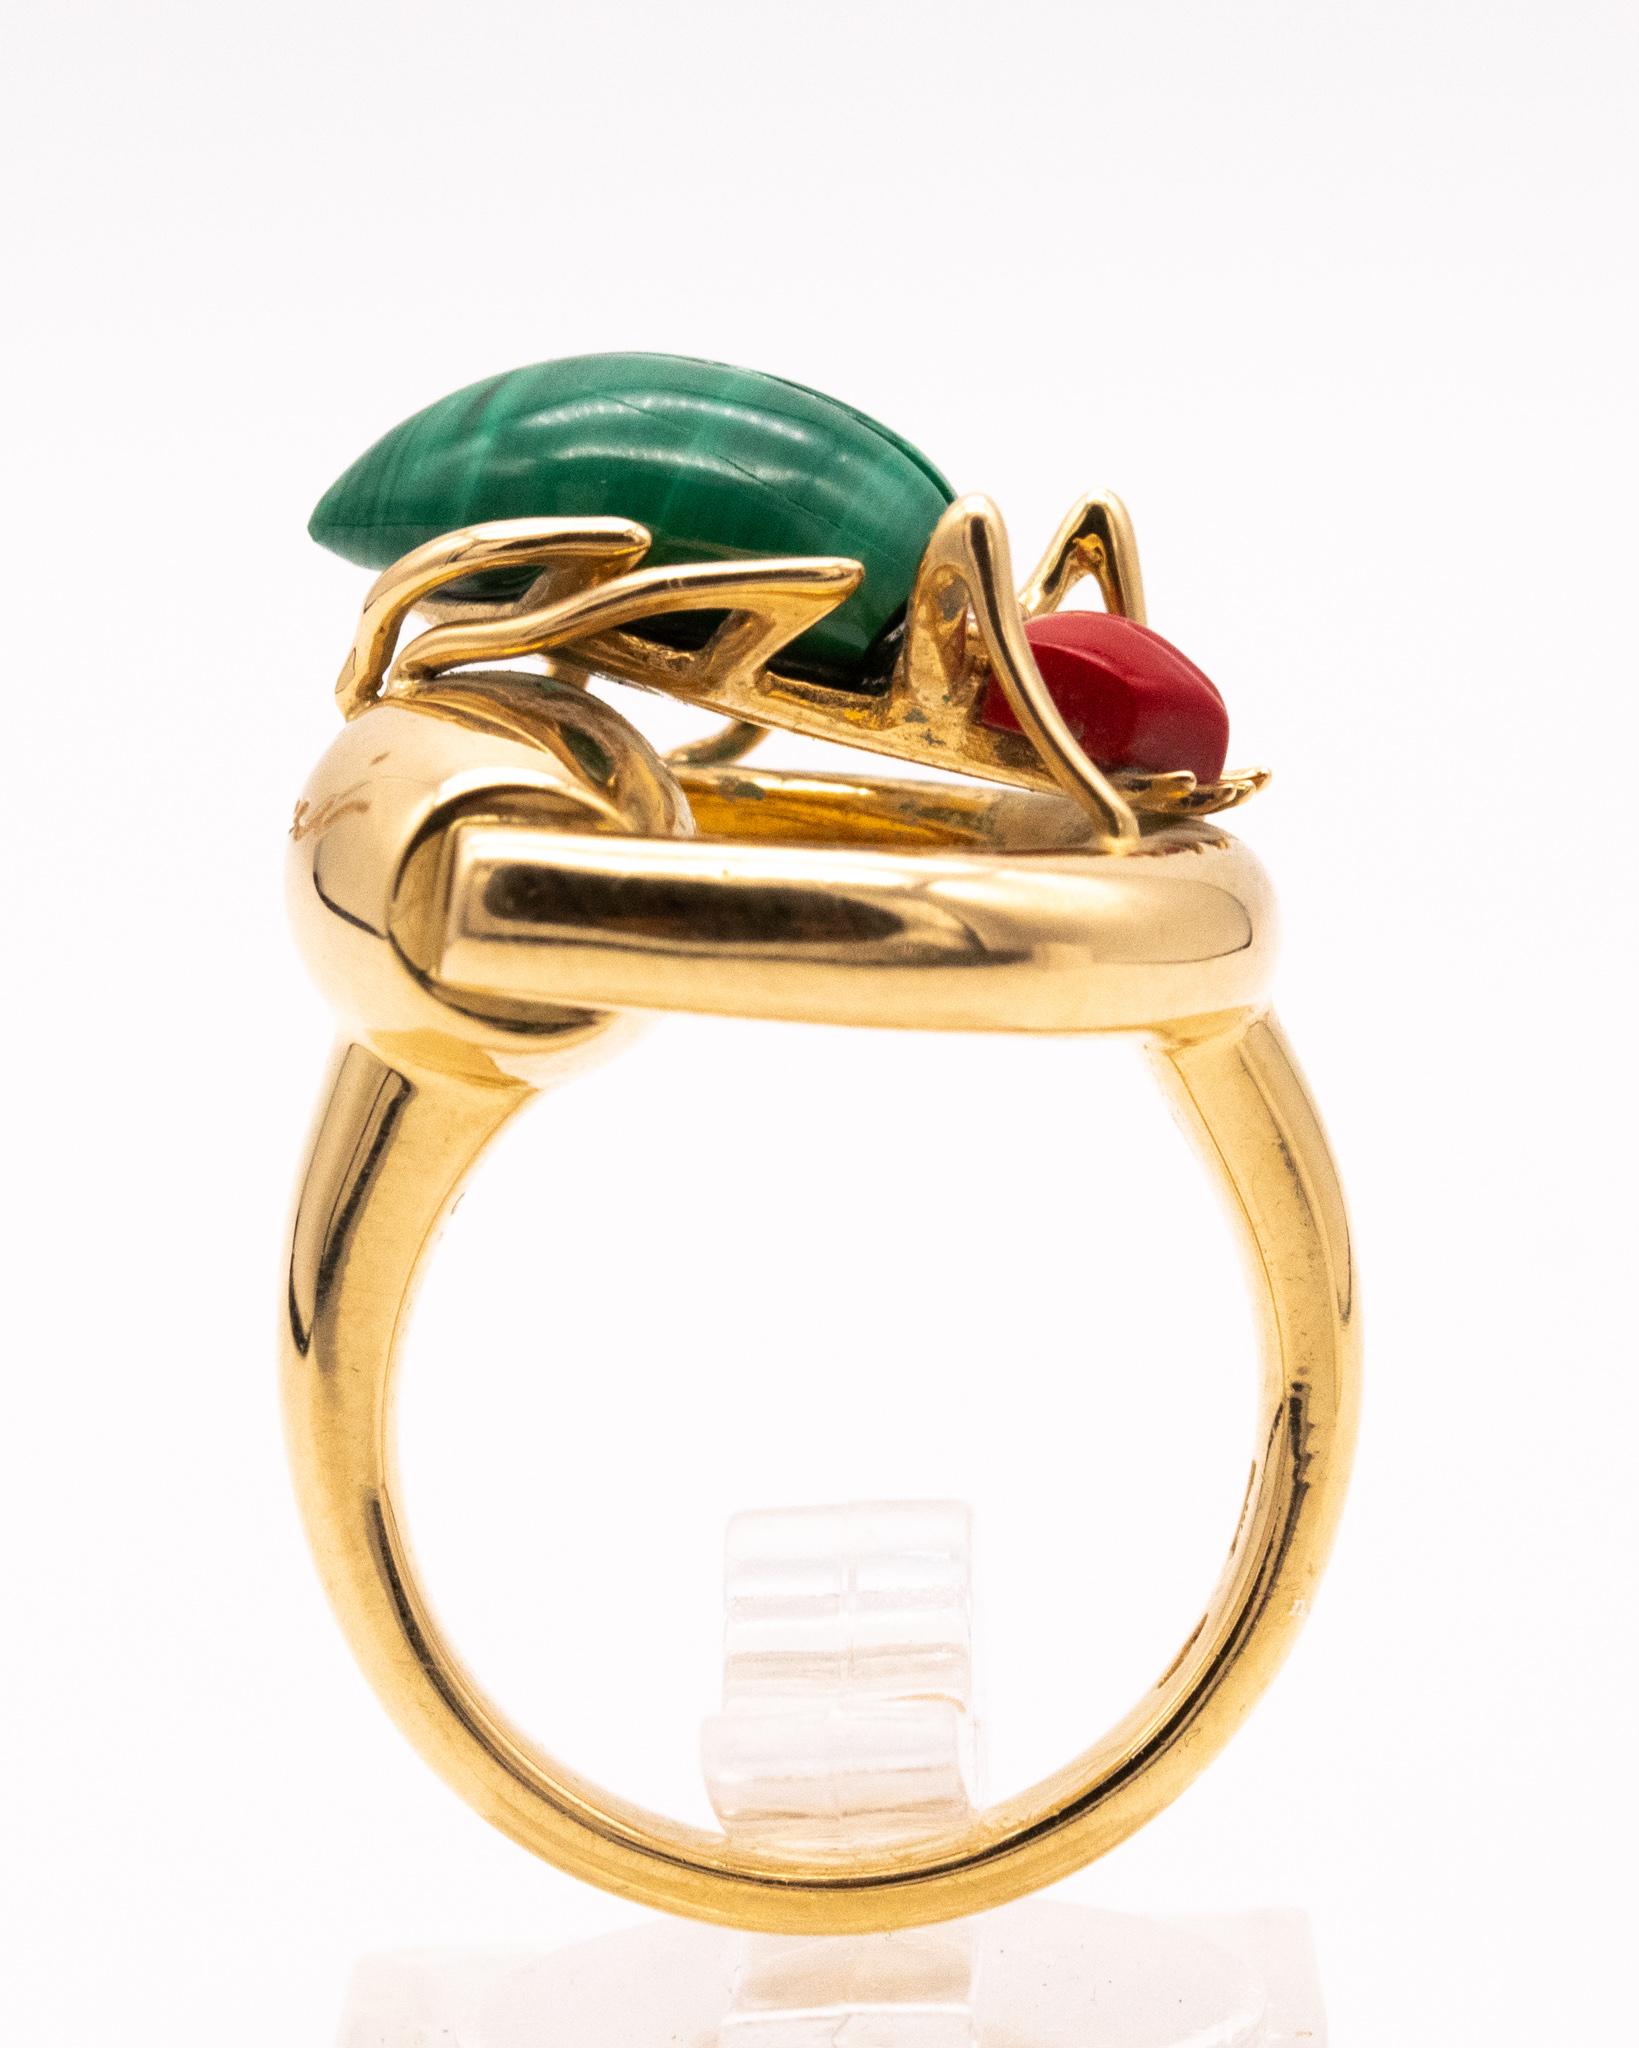 Mixed Cut Gucci Milano 18Kt Yellow Gold Beetle Ring with Diamonds, Coral and Malachite